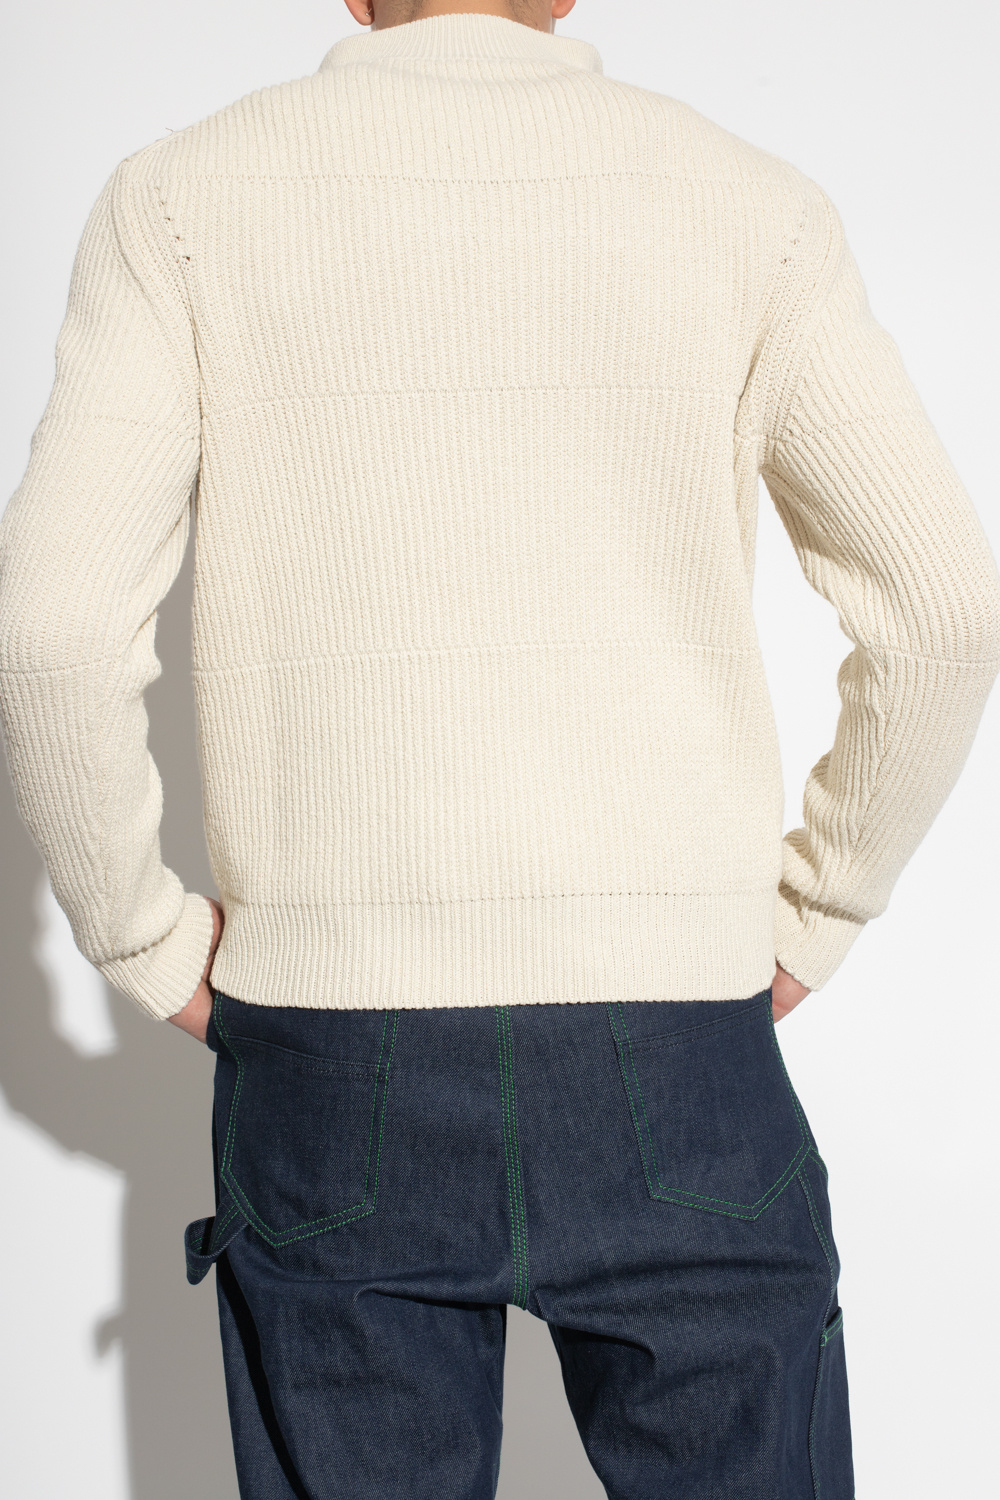 Jacquemus ‘Doce’ Blood sweater with standing collar